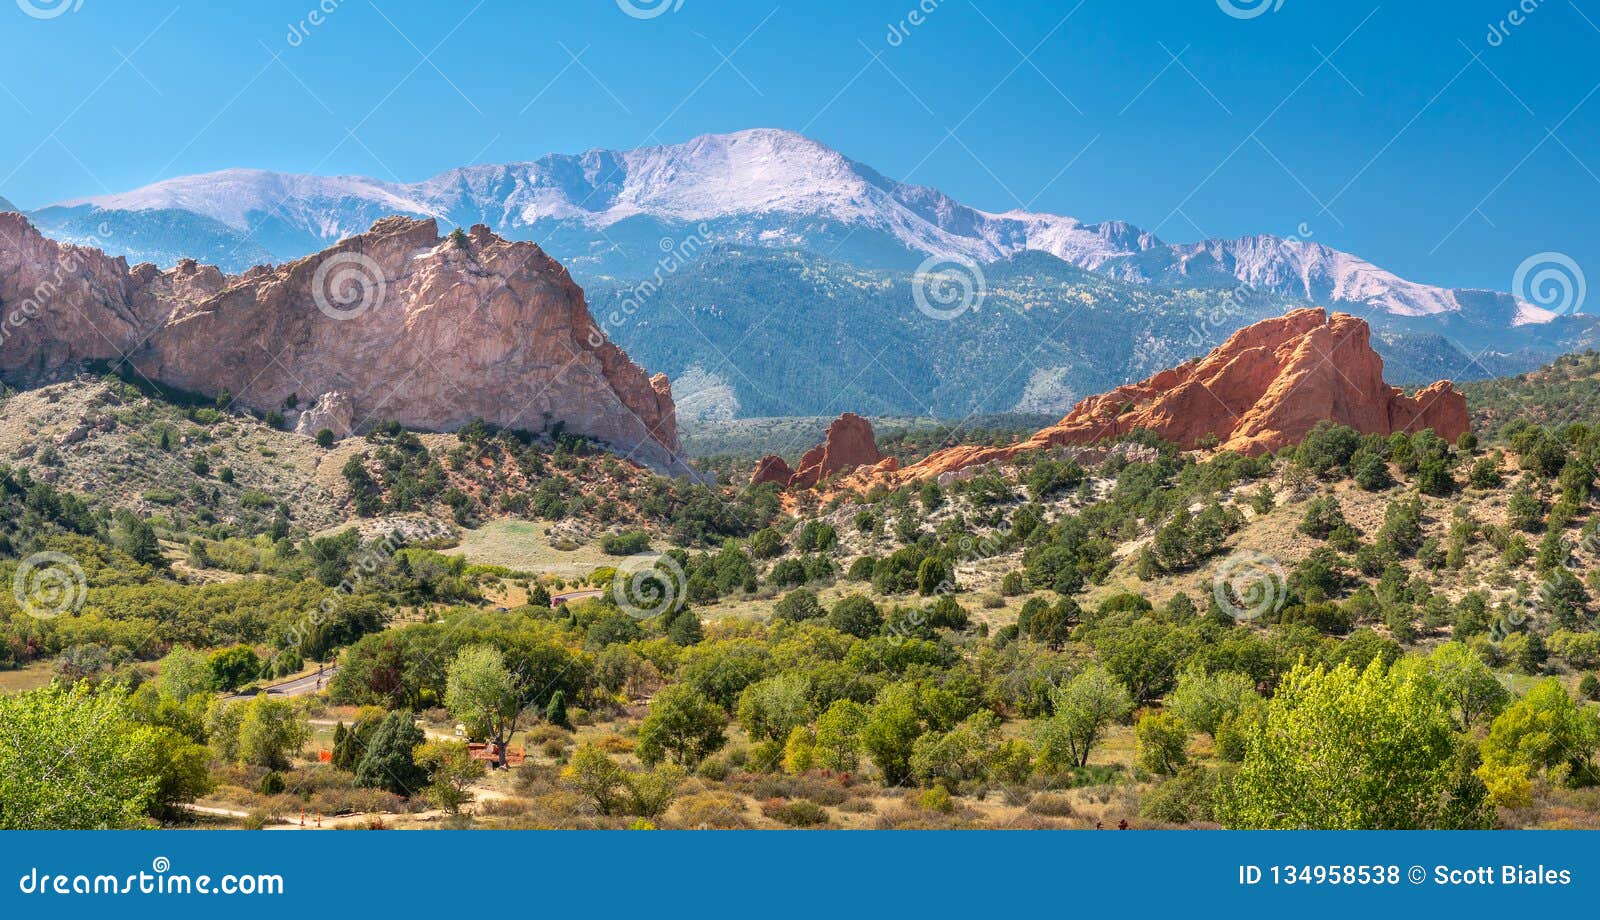 Landscape Of The Garden Of The Gods Stock Photo Image Of